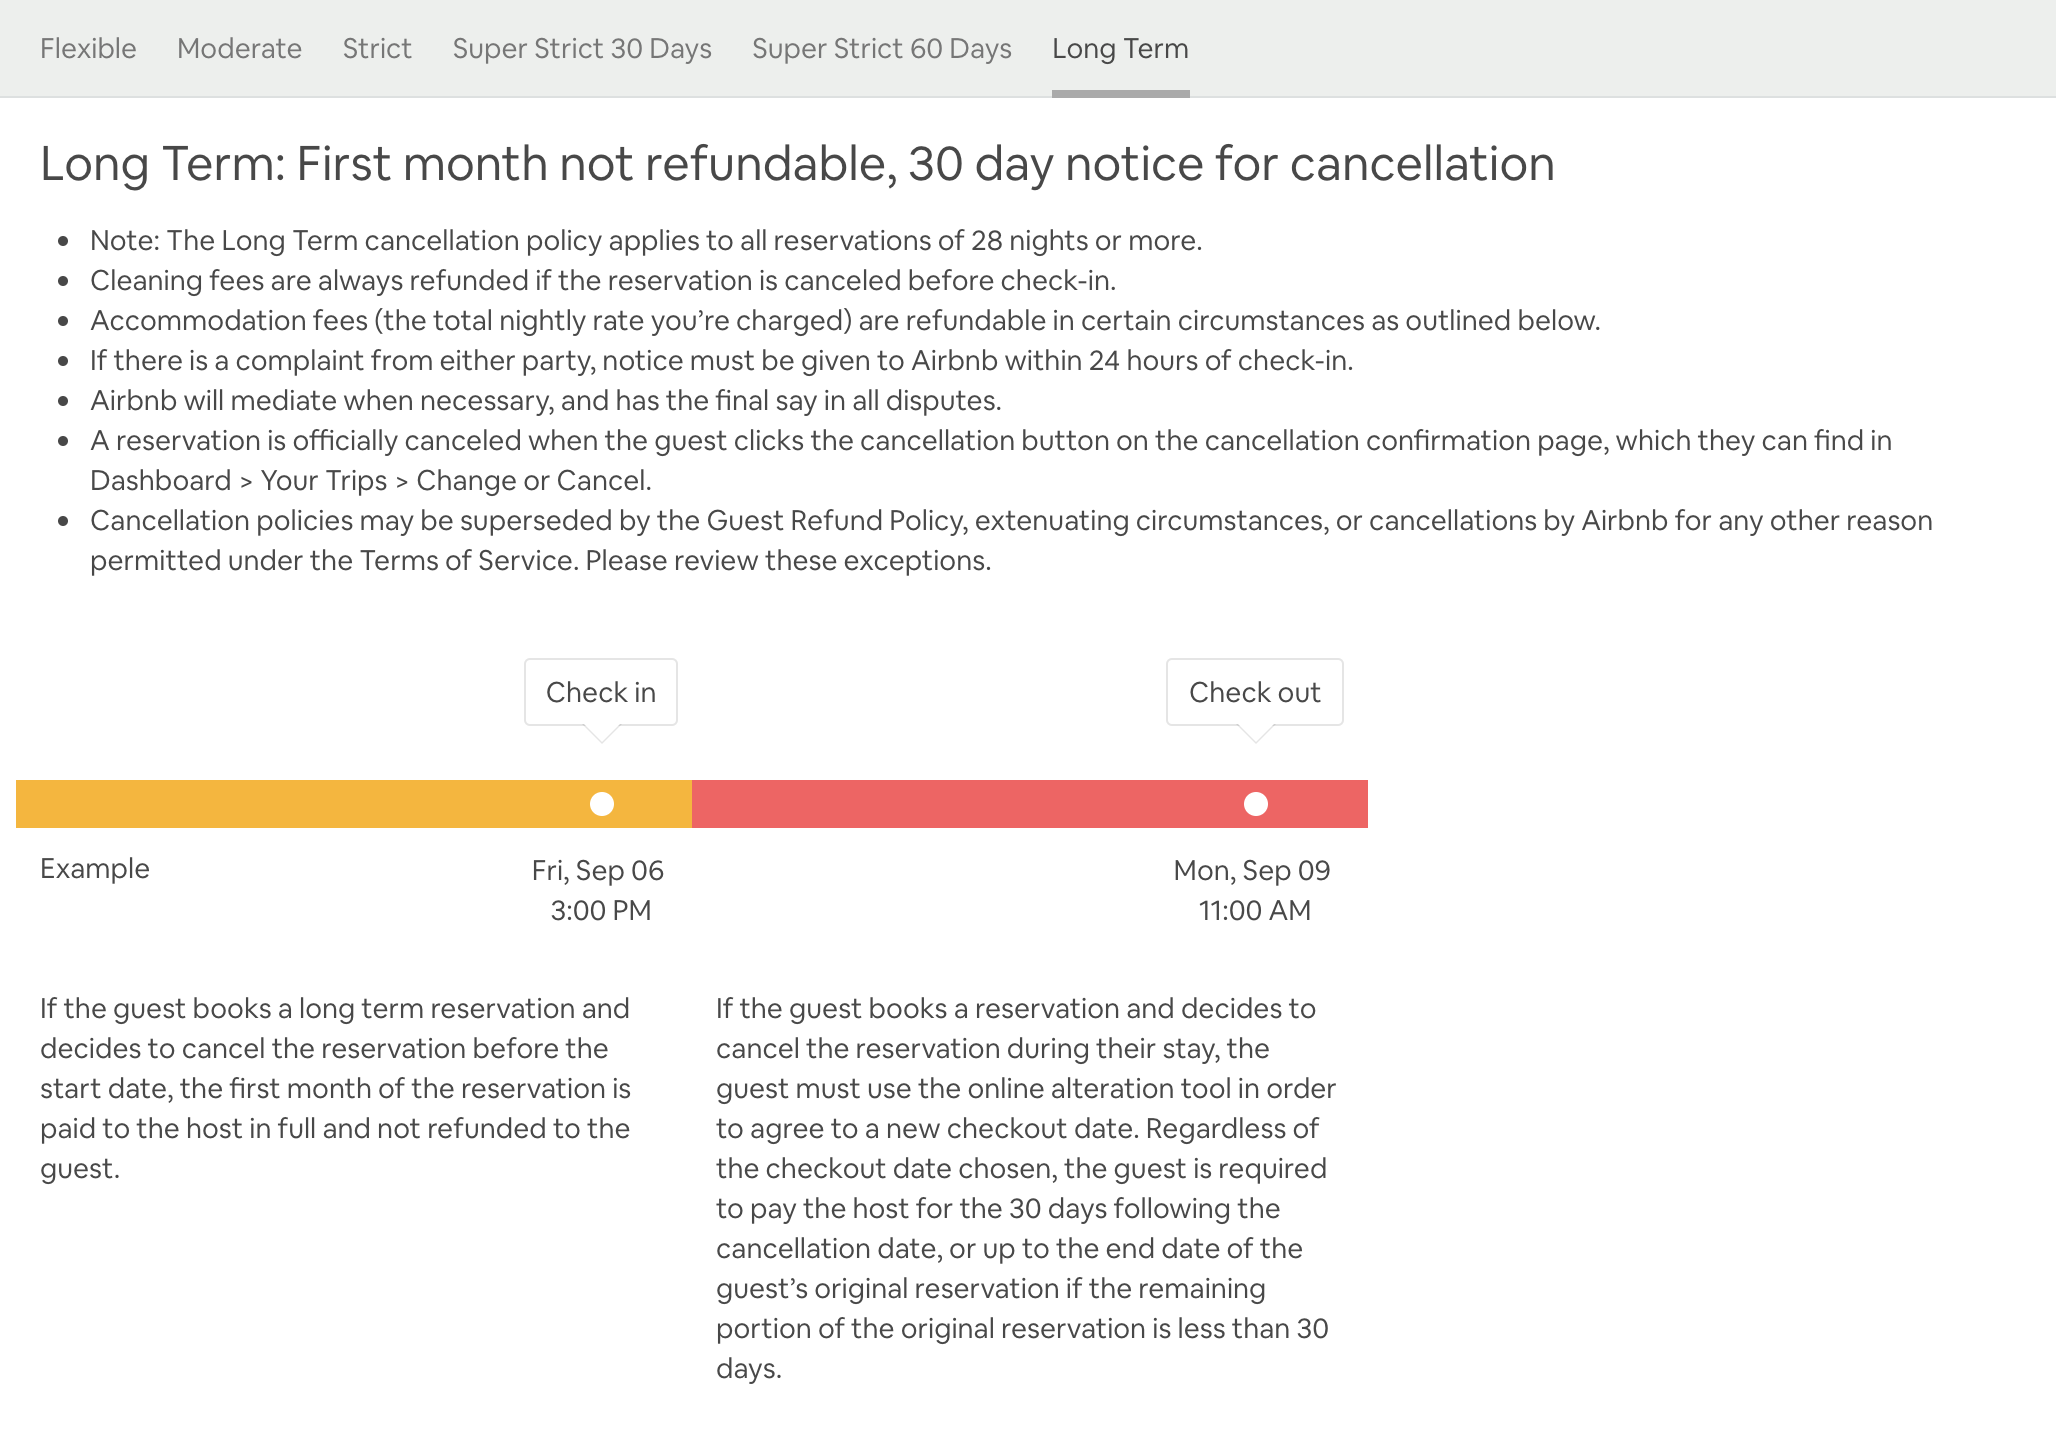 airbnb travel cancellation policy